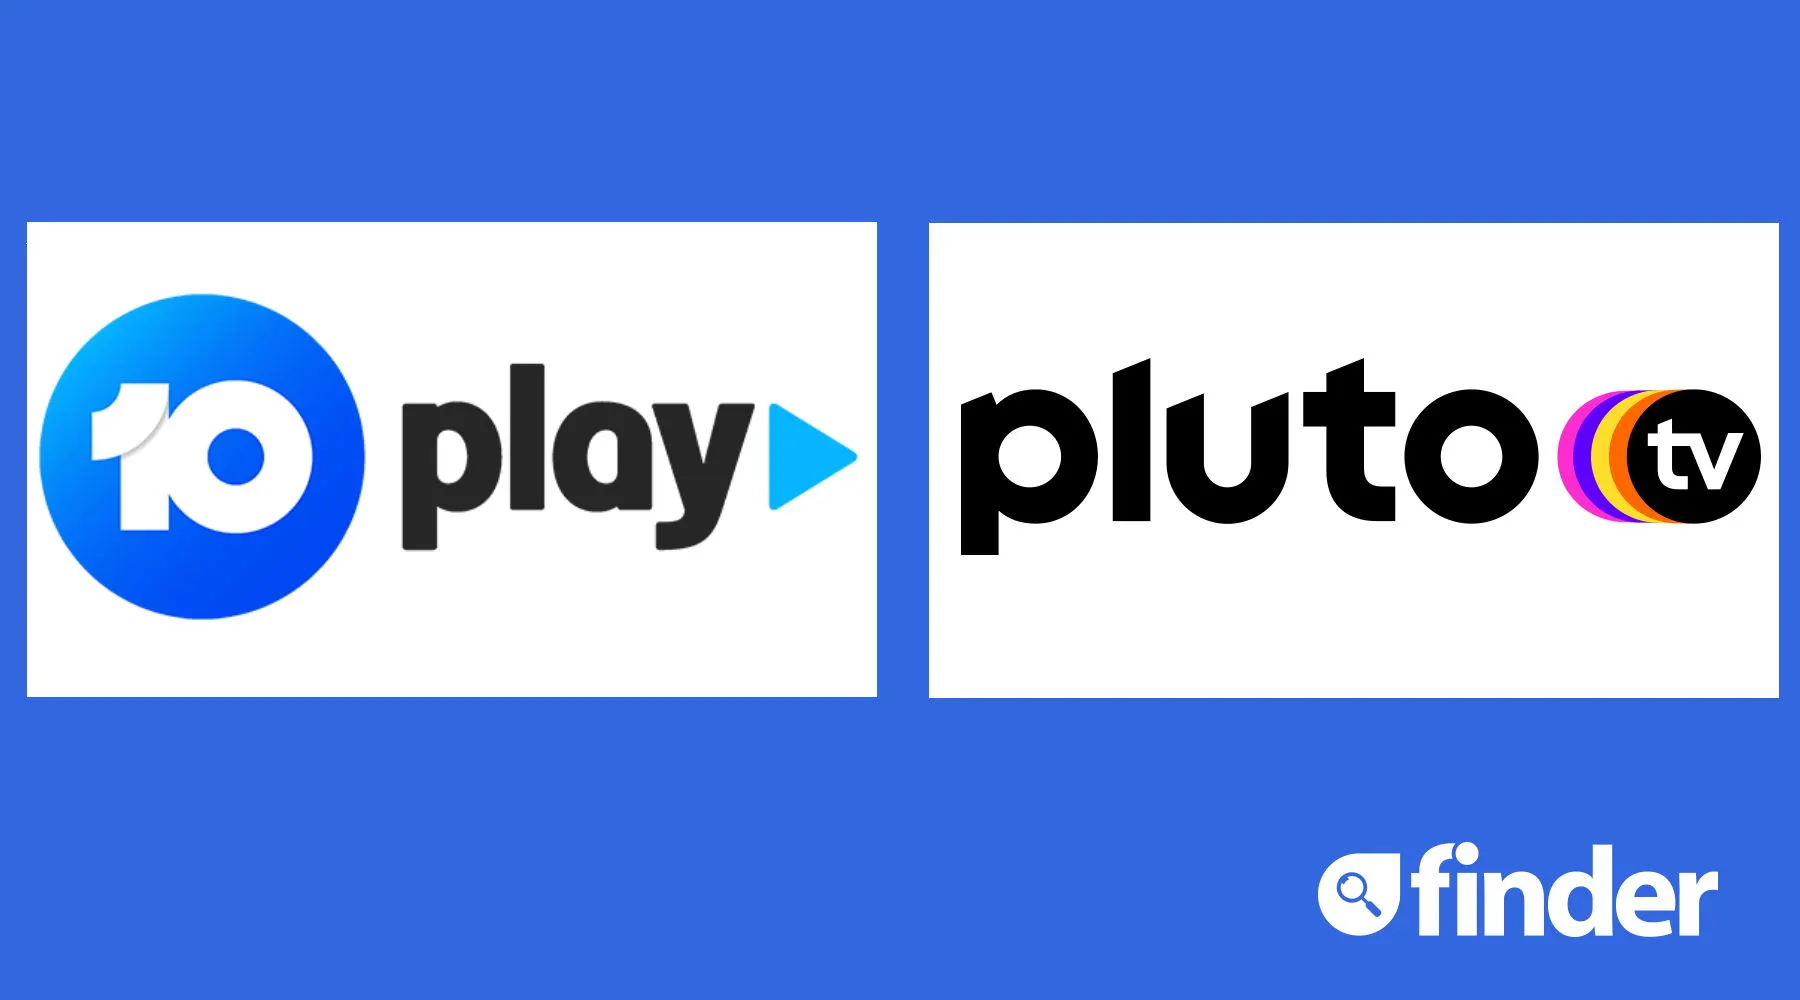 Pluto TV channels coming to Australia on 10 play in 2023 Finder